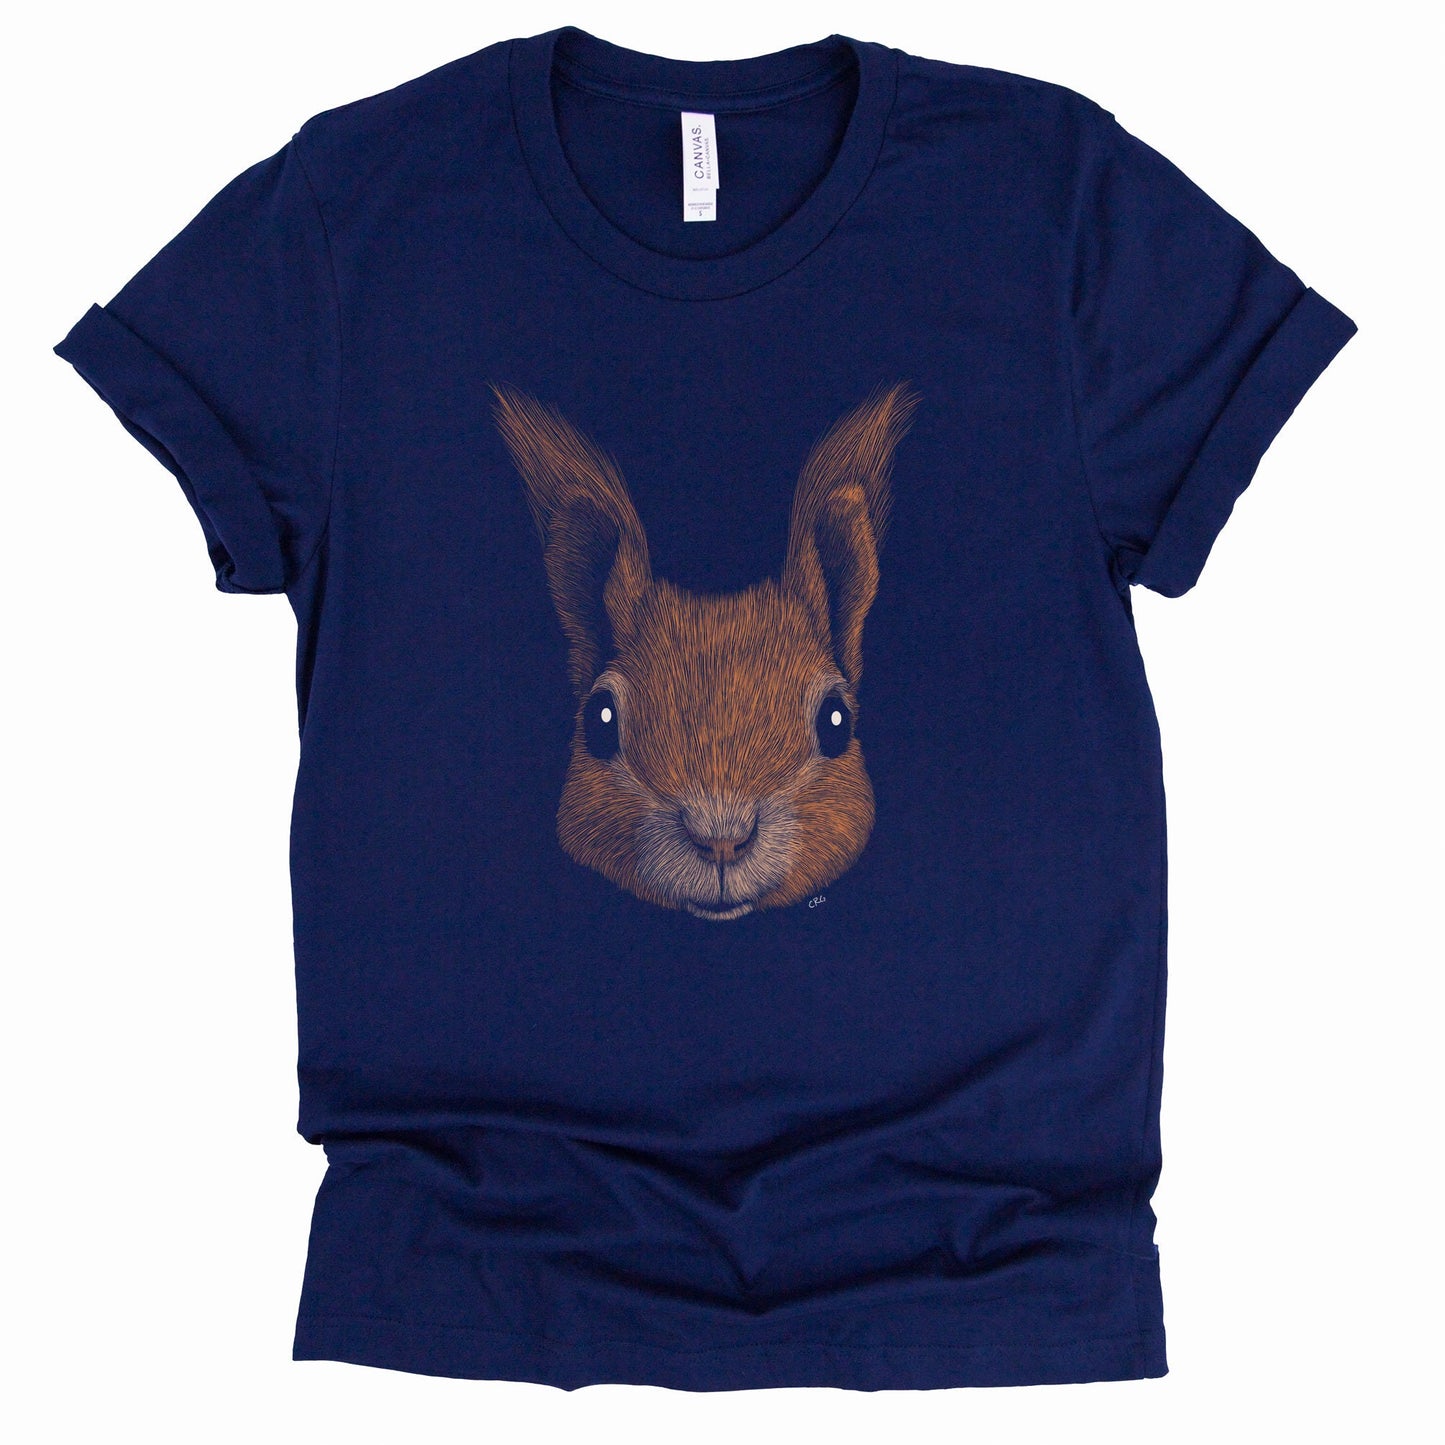 Red Squirrel Shirt